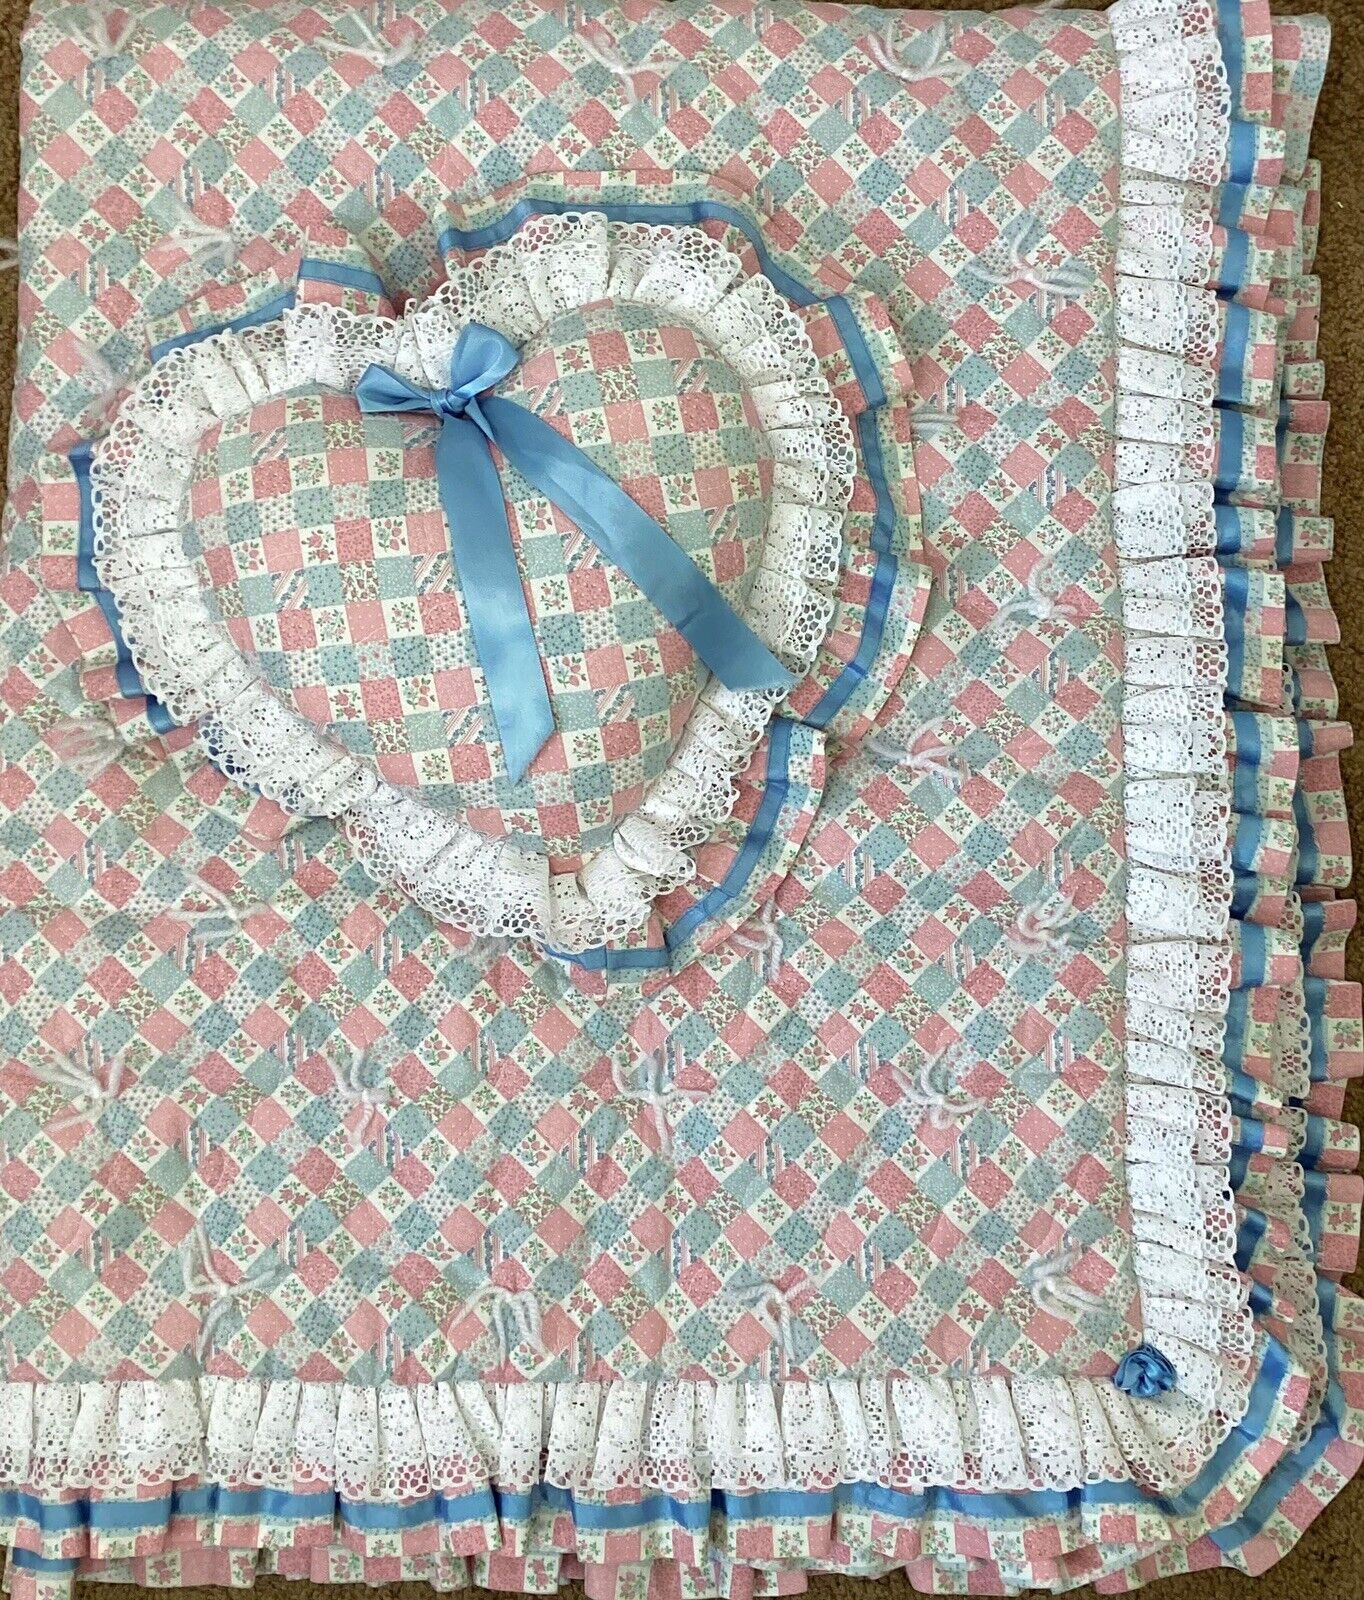 Vintage 80s Handmade Patchwork Calico Cheater Crib Quilt/Pillow 45”x55”